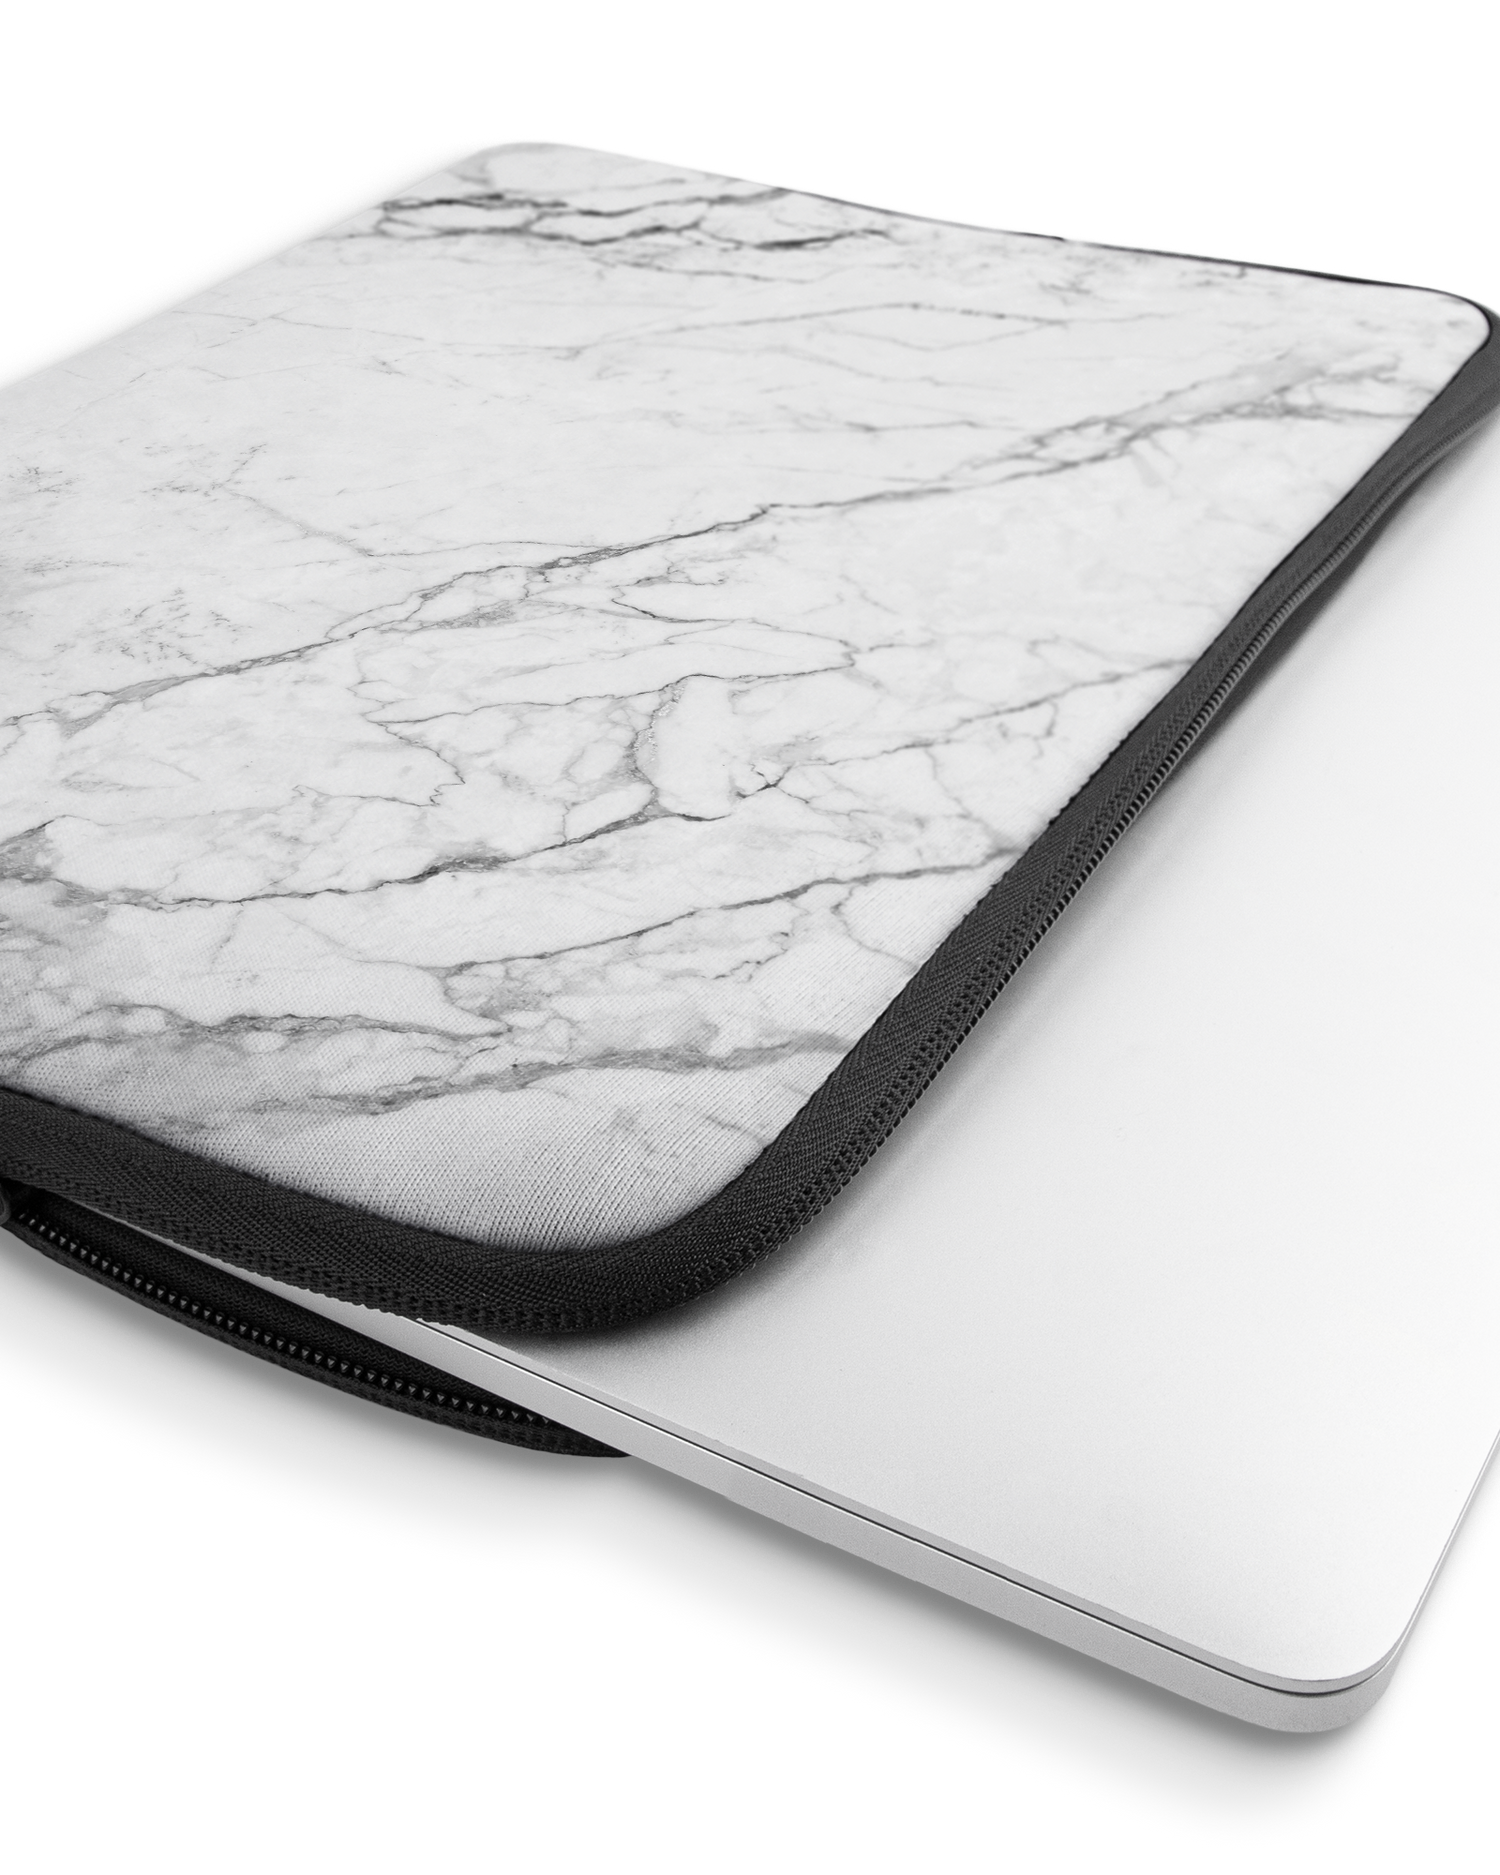 White Marble Laptop Case 16 inch with device inside